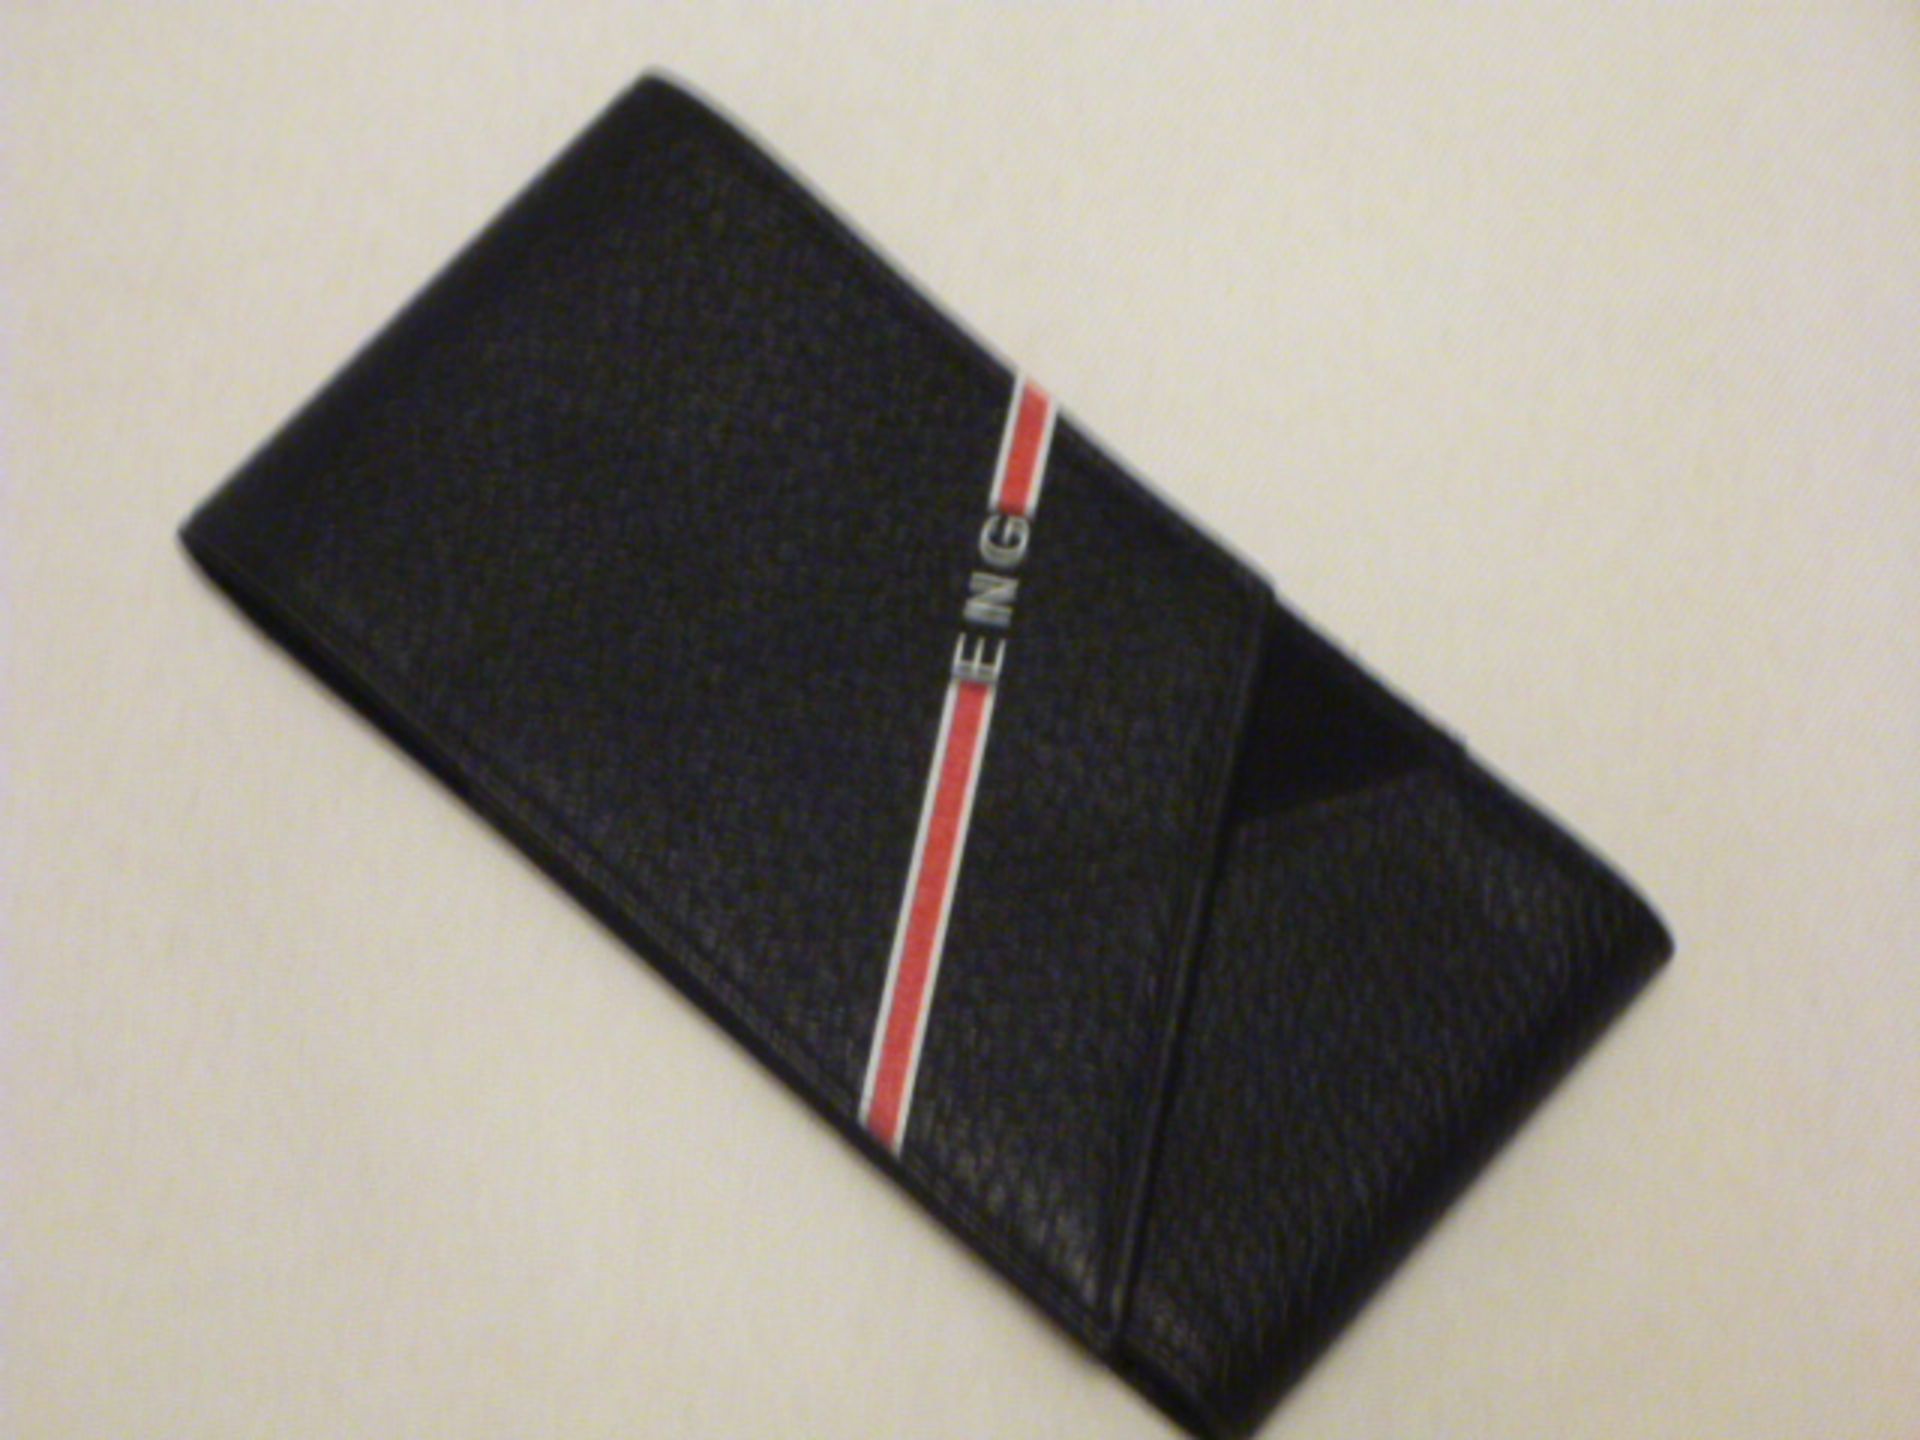 Vertu Aster Touch Phone, Black Leather. Demonstrator, S/N I-001099. Comes with Matching Leather - Image 3 of 3